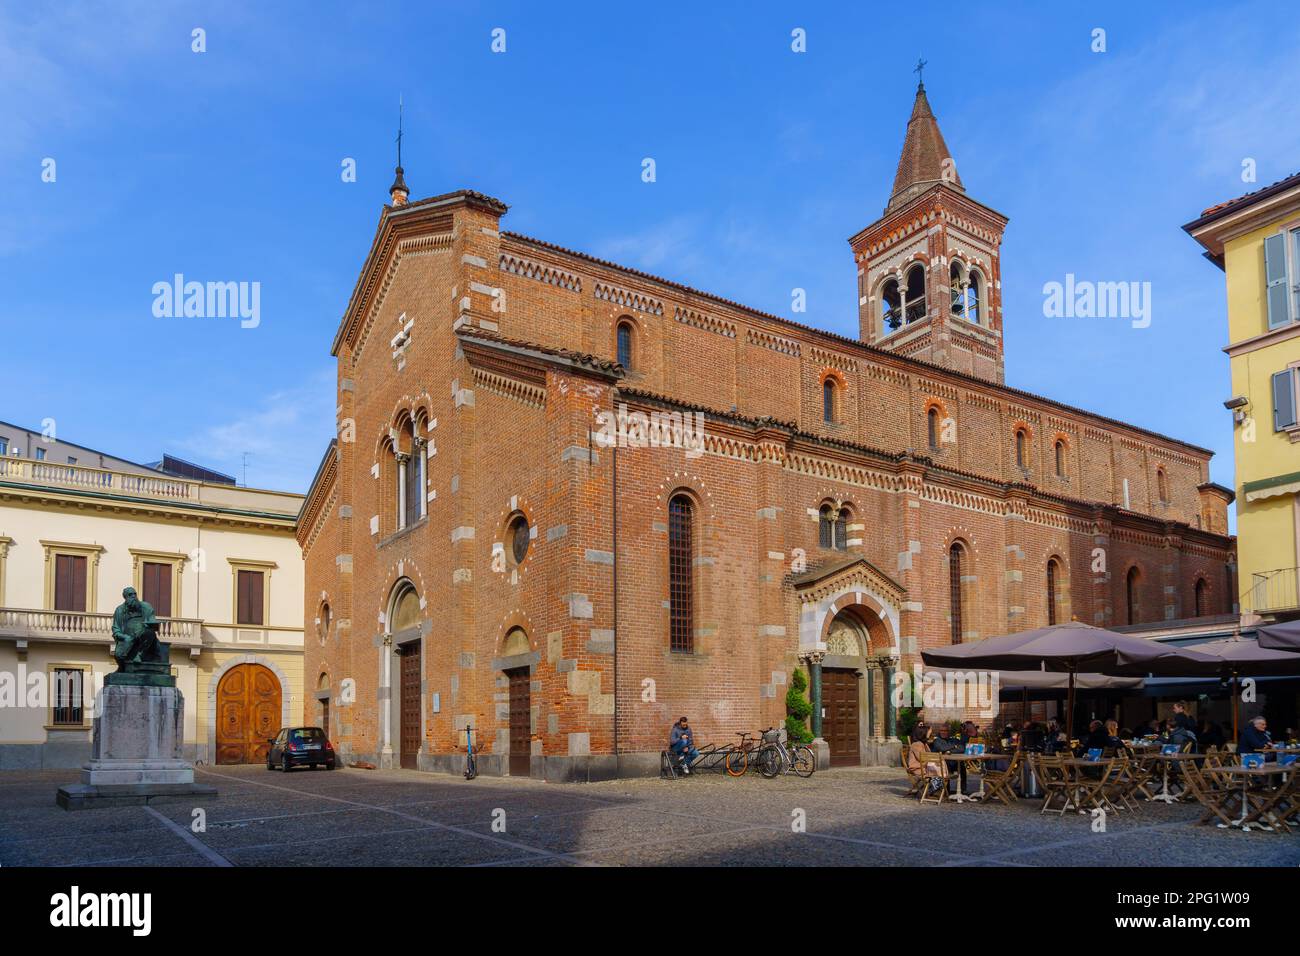 Monza, Italy - February 25, 2023: View of the San Pietro Martire church, with its piazza and visitors, in Monza, Lombardy, Northern Italy Stock Photo